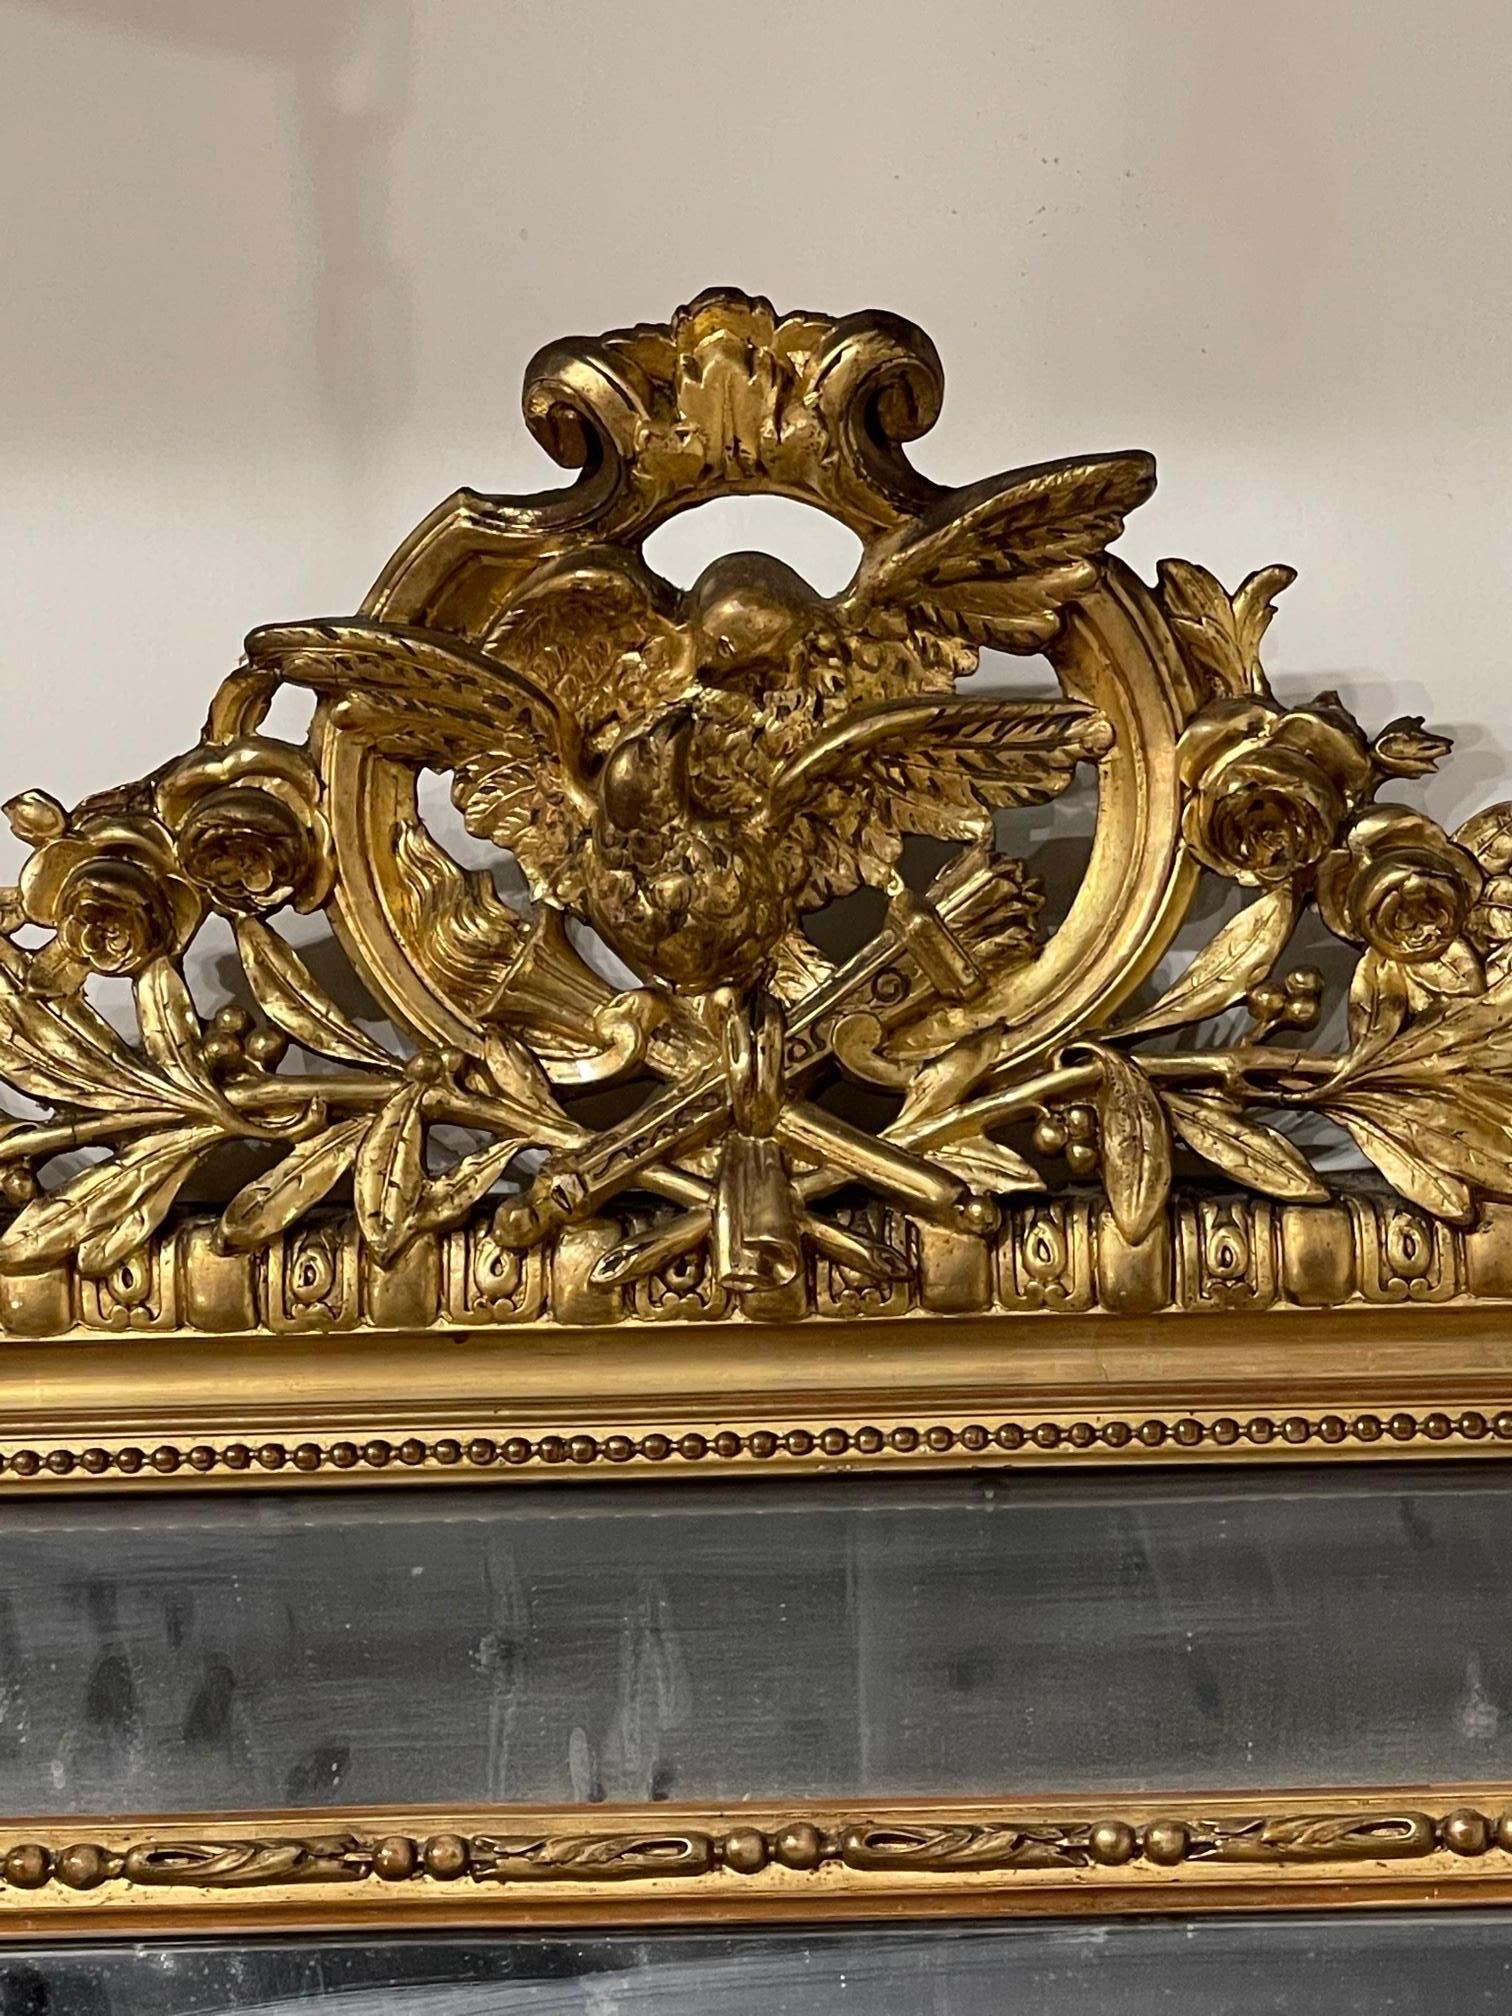 Large scale 19th century French Louis XVI style carved and gilt-wood mirror, Circa 1870. The glass will be cleaned before it is sent out. This is beautiful statement piece.